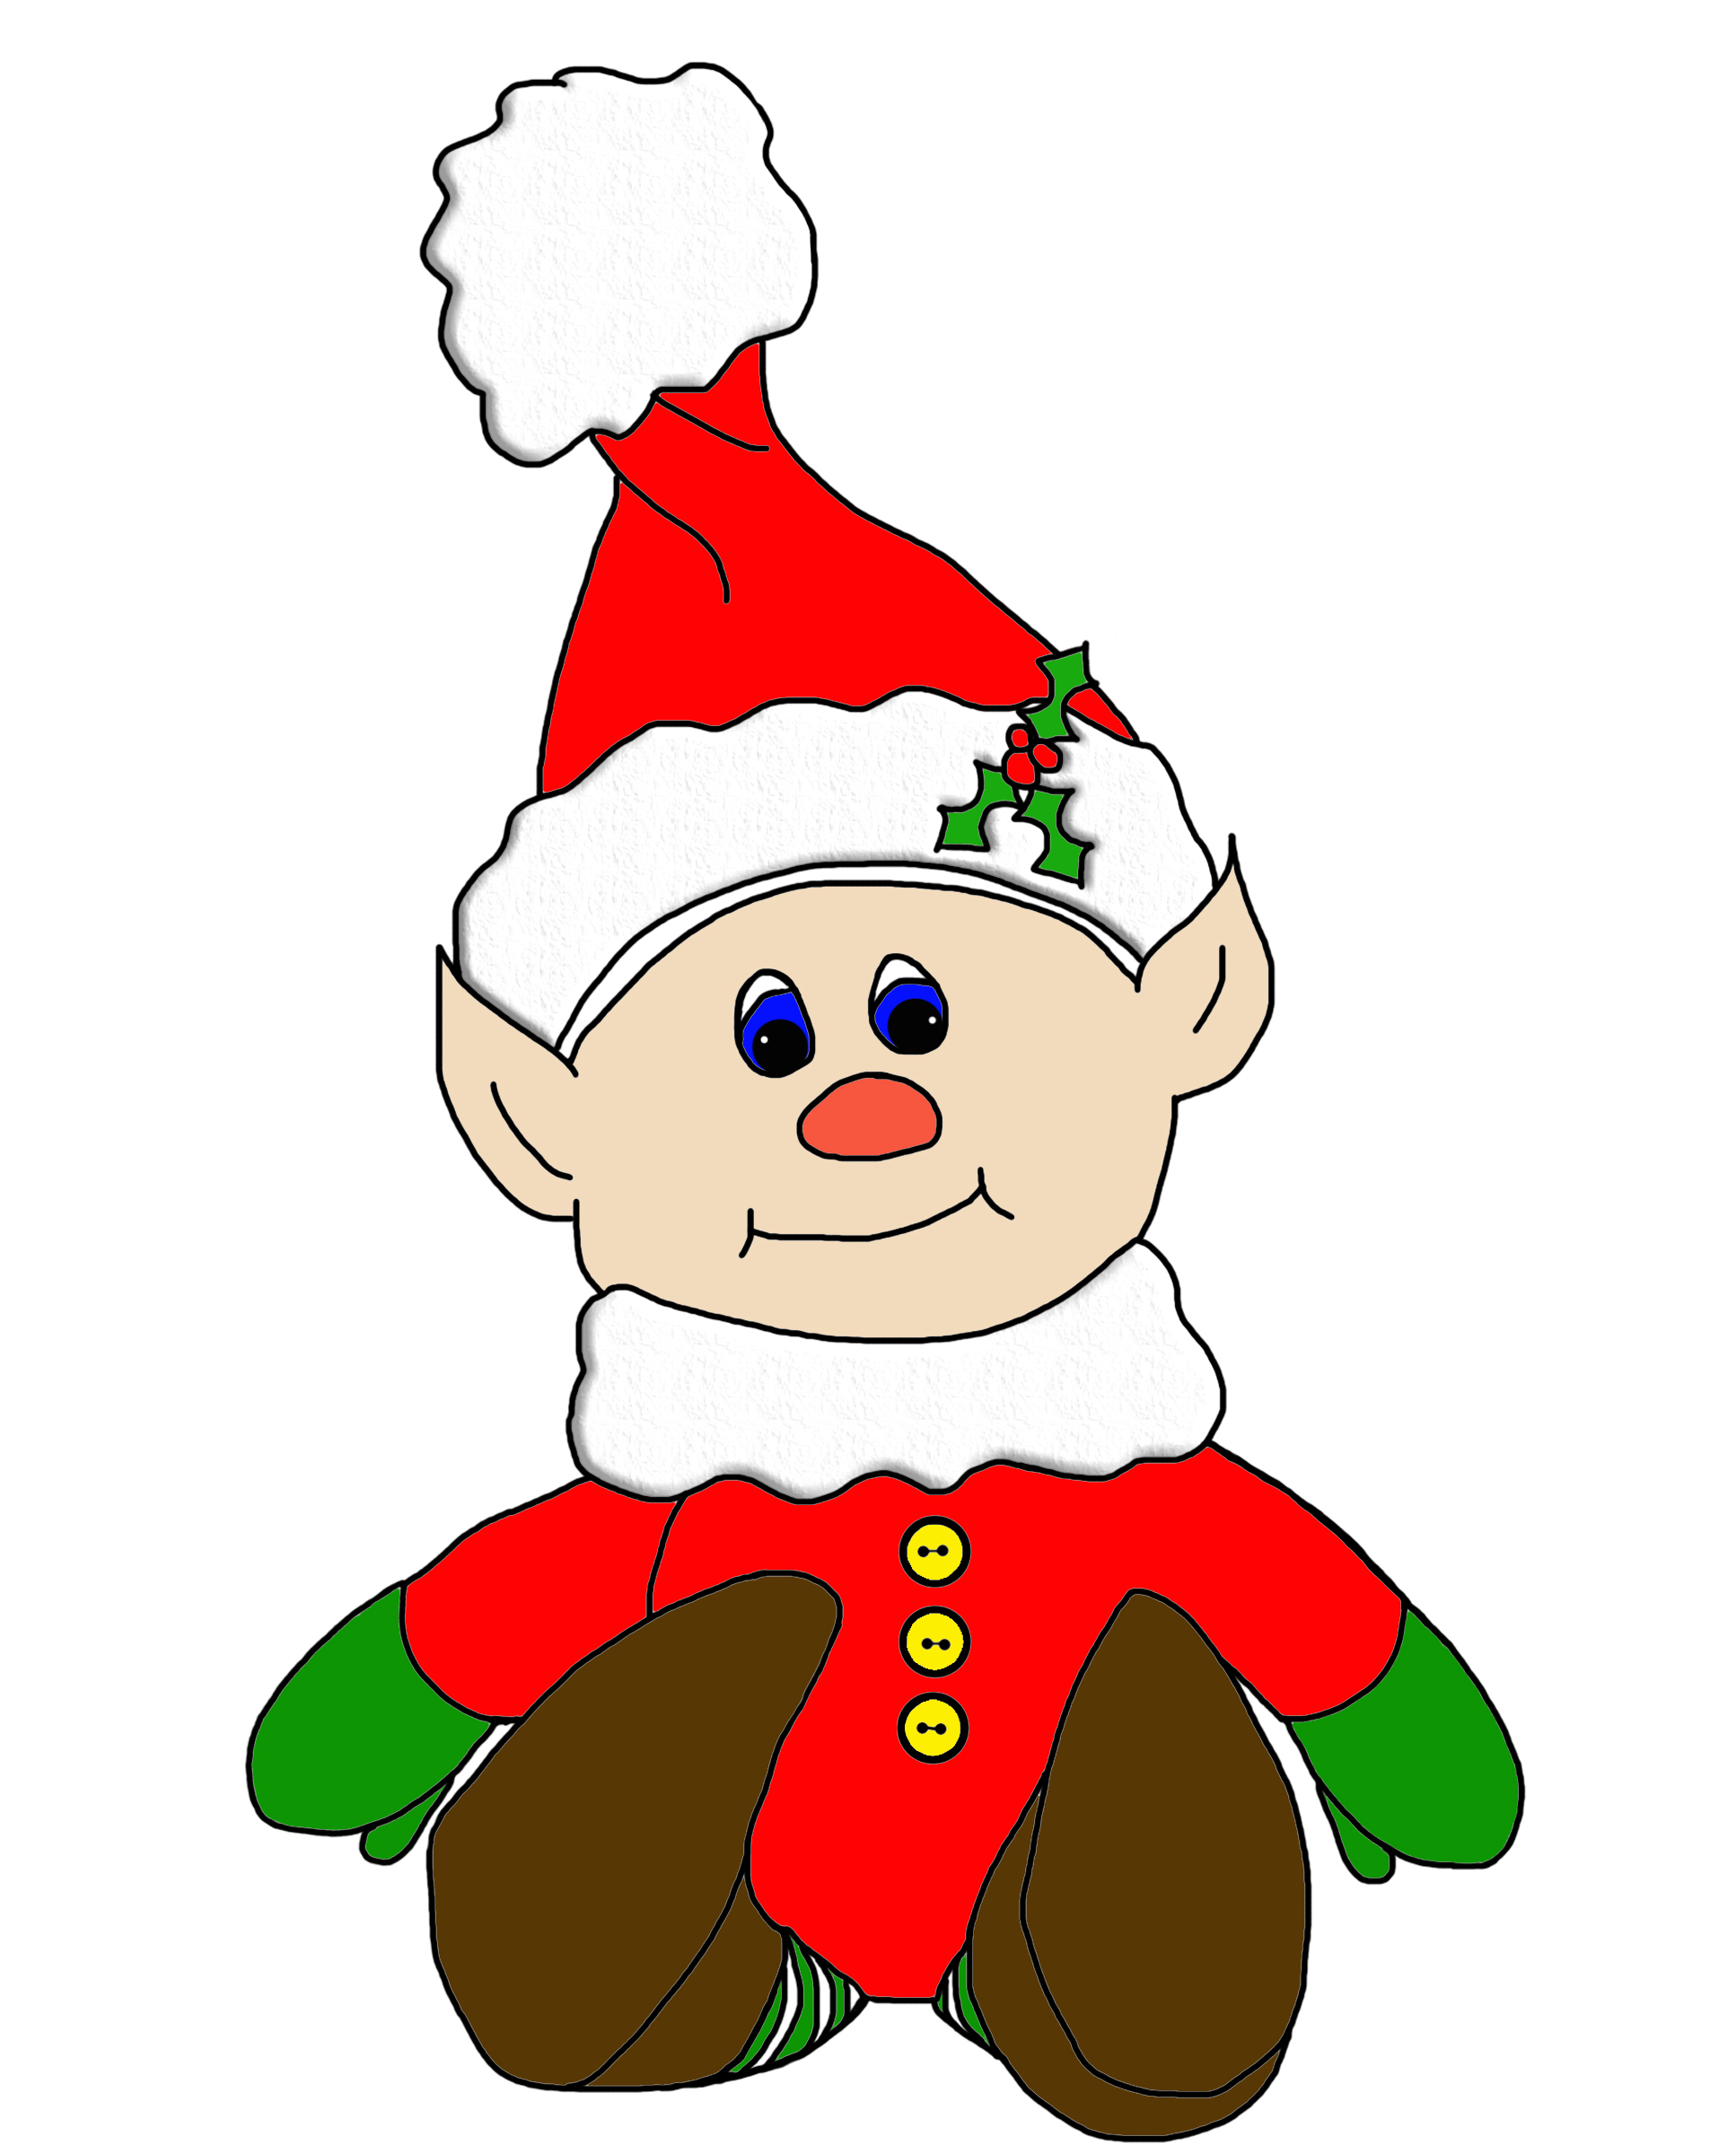 Picture Of Christmas Elf - Clipart library